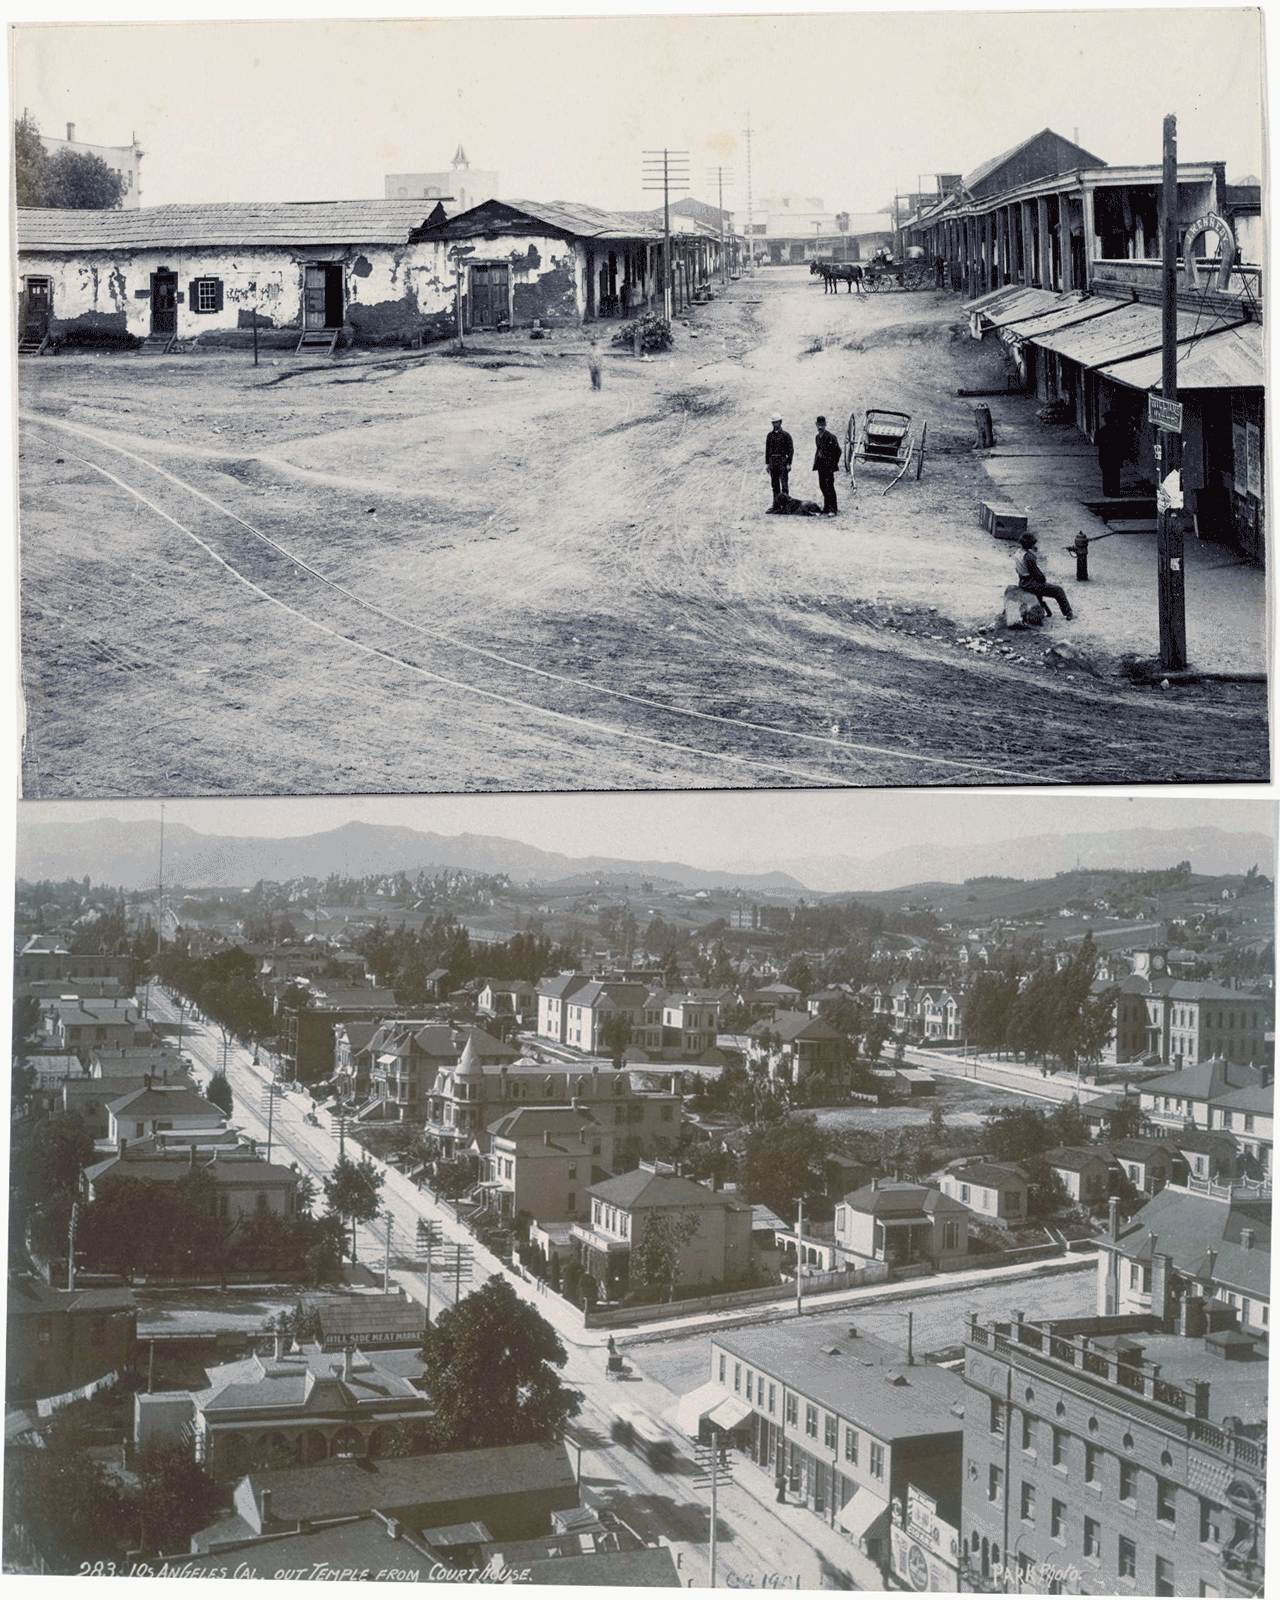 Two black and white photos. Top shows a dirt avenue and low buildings. Bottom shows buildings around paved roads.